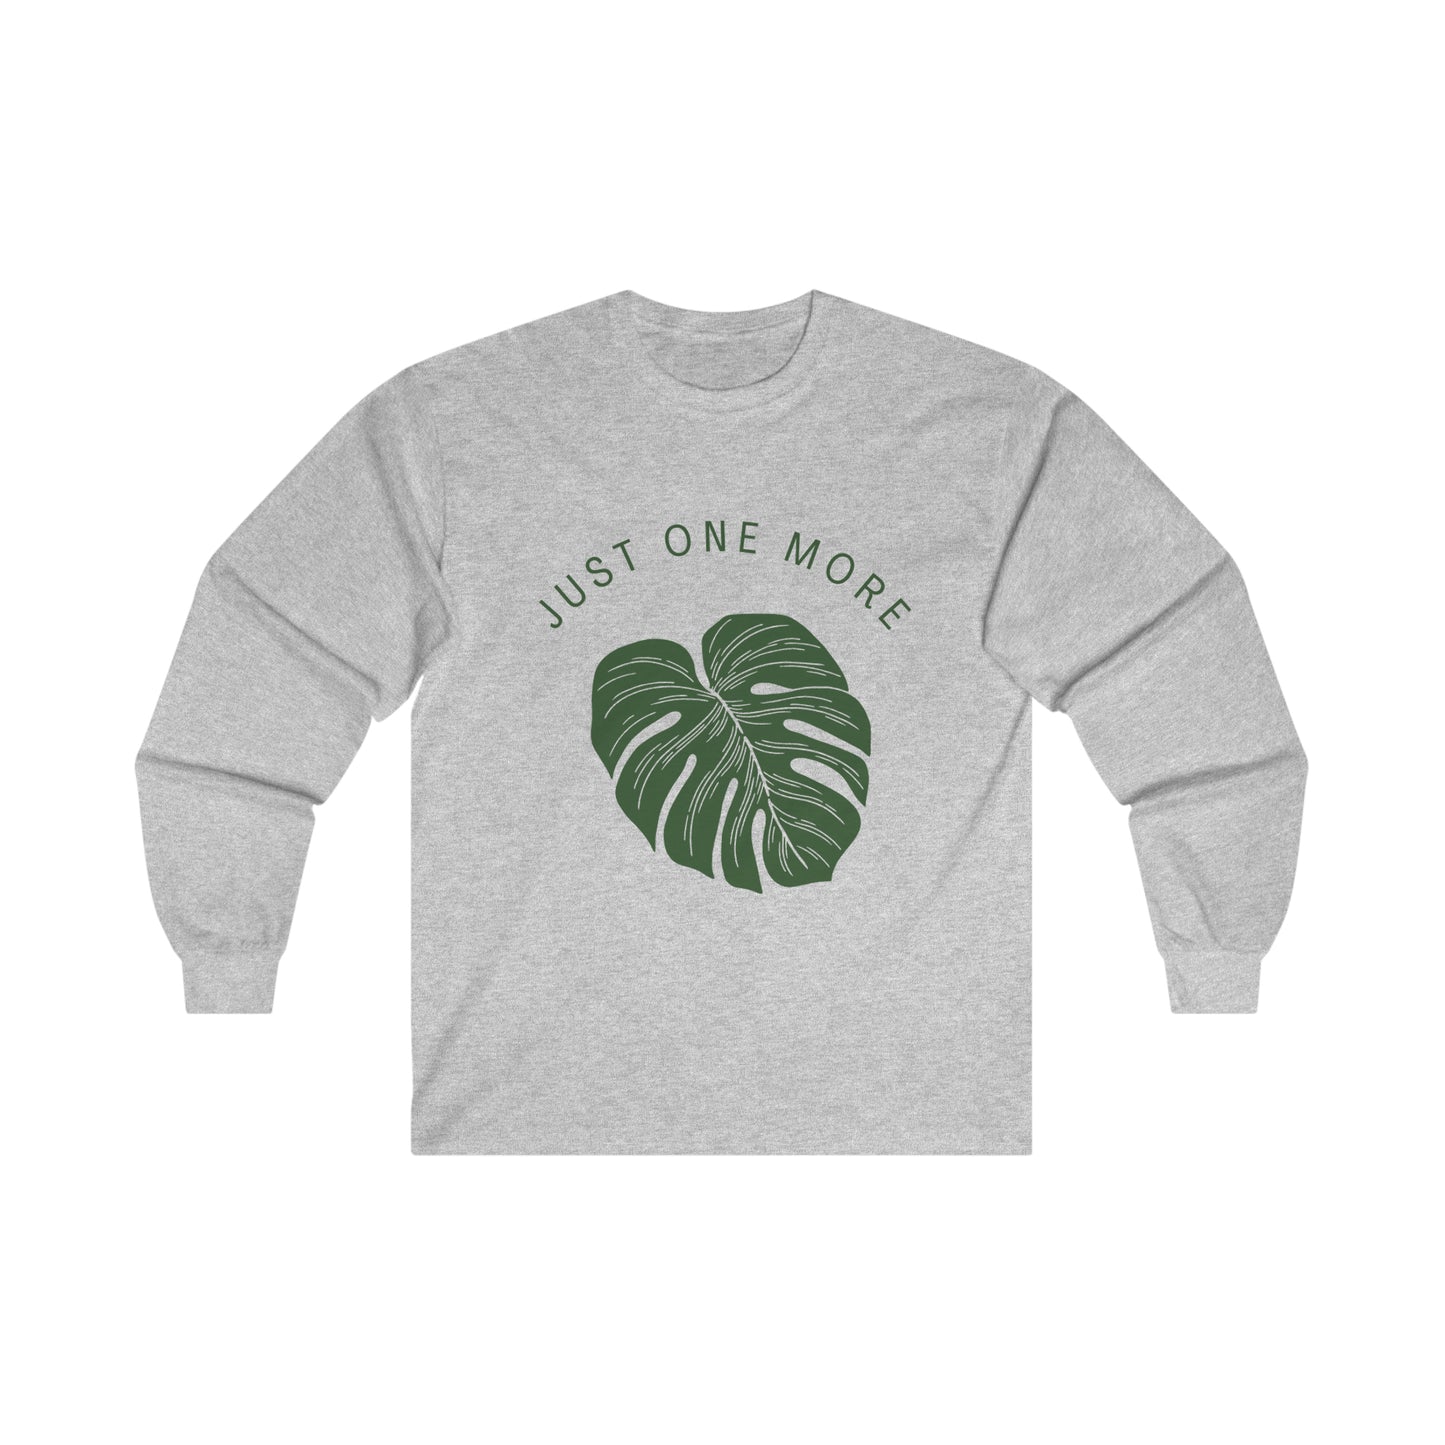 One More Cotton Long Sleeve